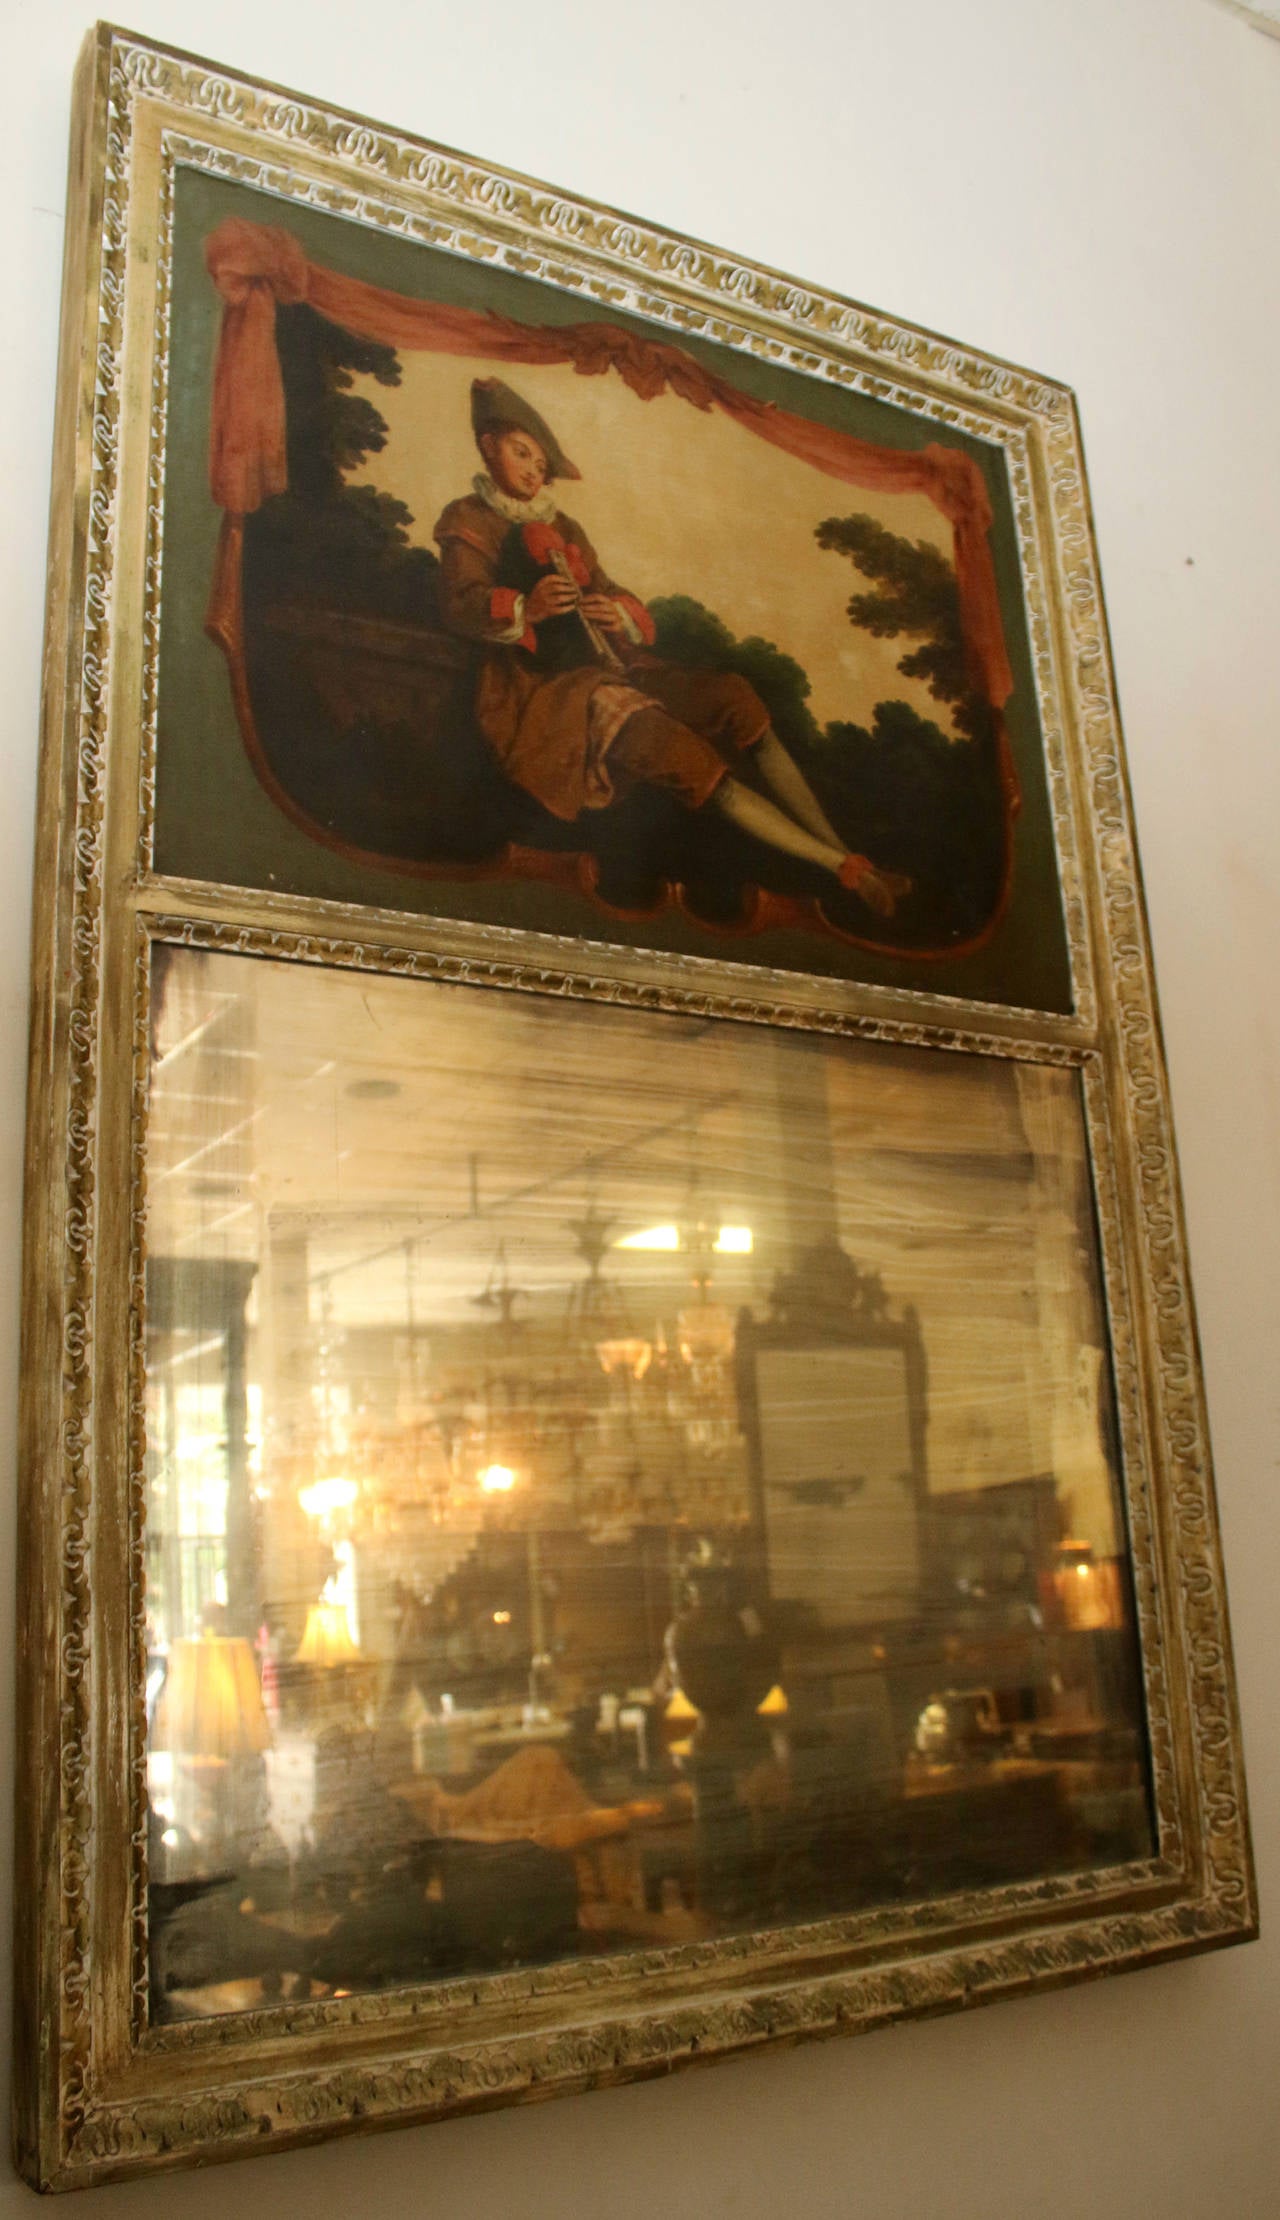 Impressive size French Trumeau mirror in the Louis XVI style dating from the early 1800s. The oil on canvas painting depicts a musician dressed in court attire, a young gentleman playing a double flute in an pastoral setting. The colorful scene is